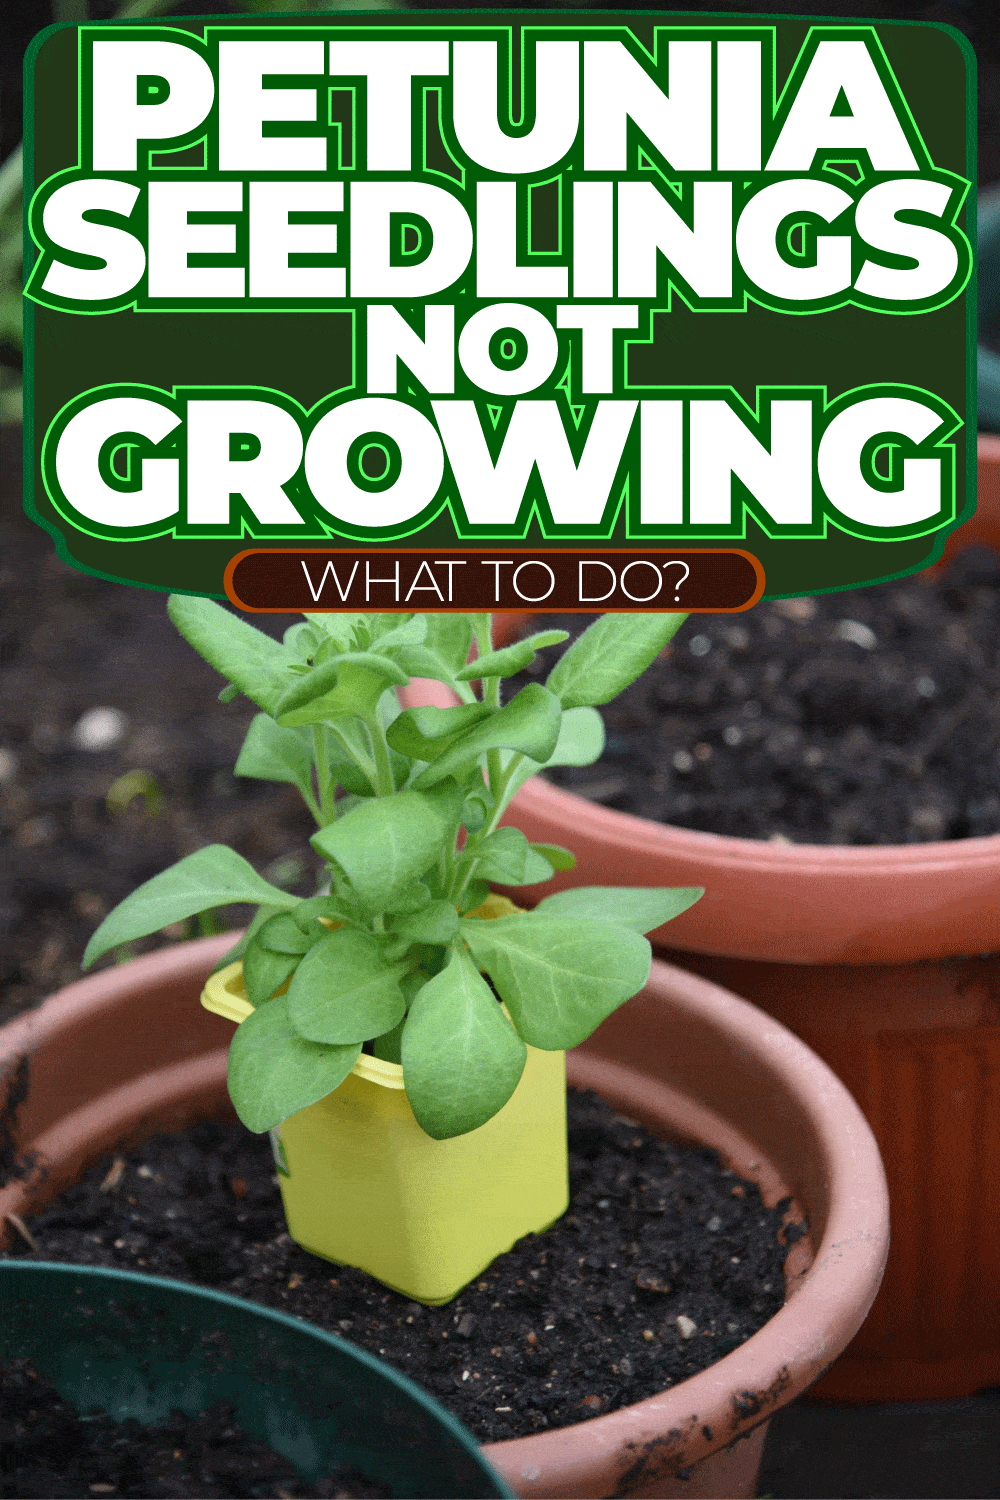 Petunia Seedlings Not Growing - What To Do